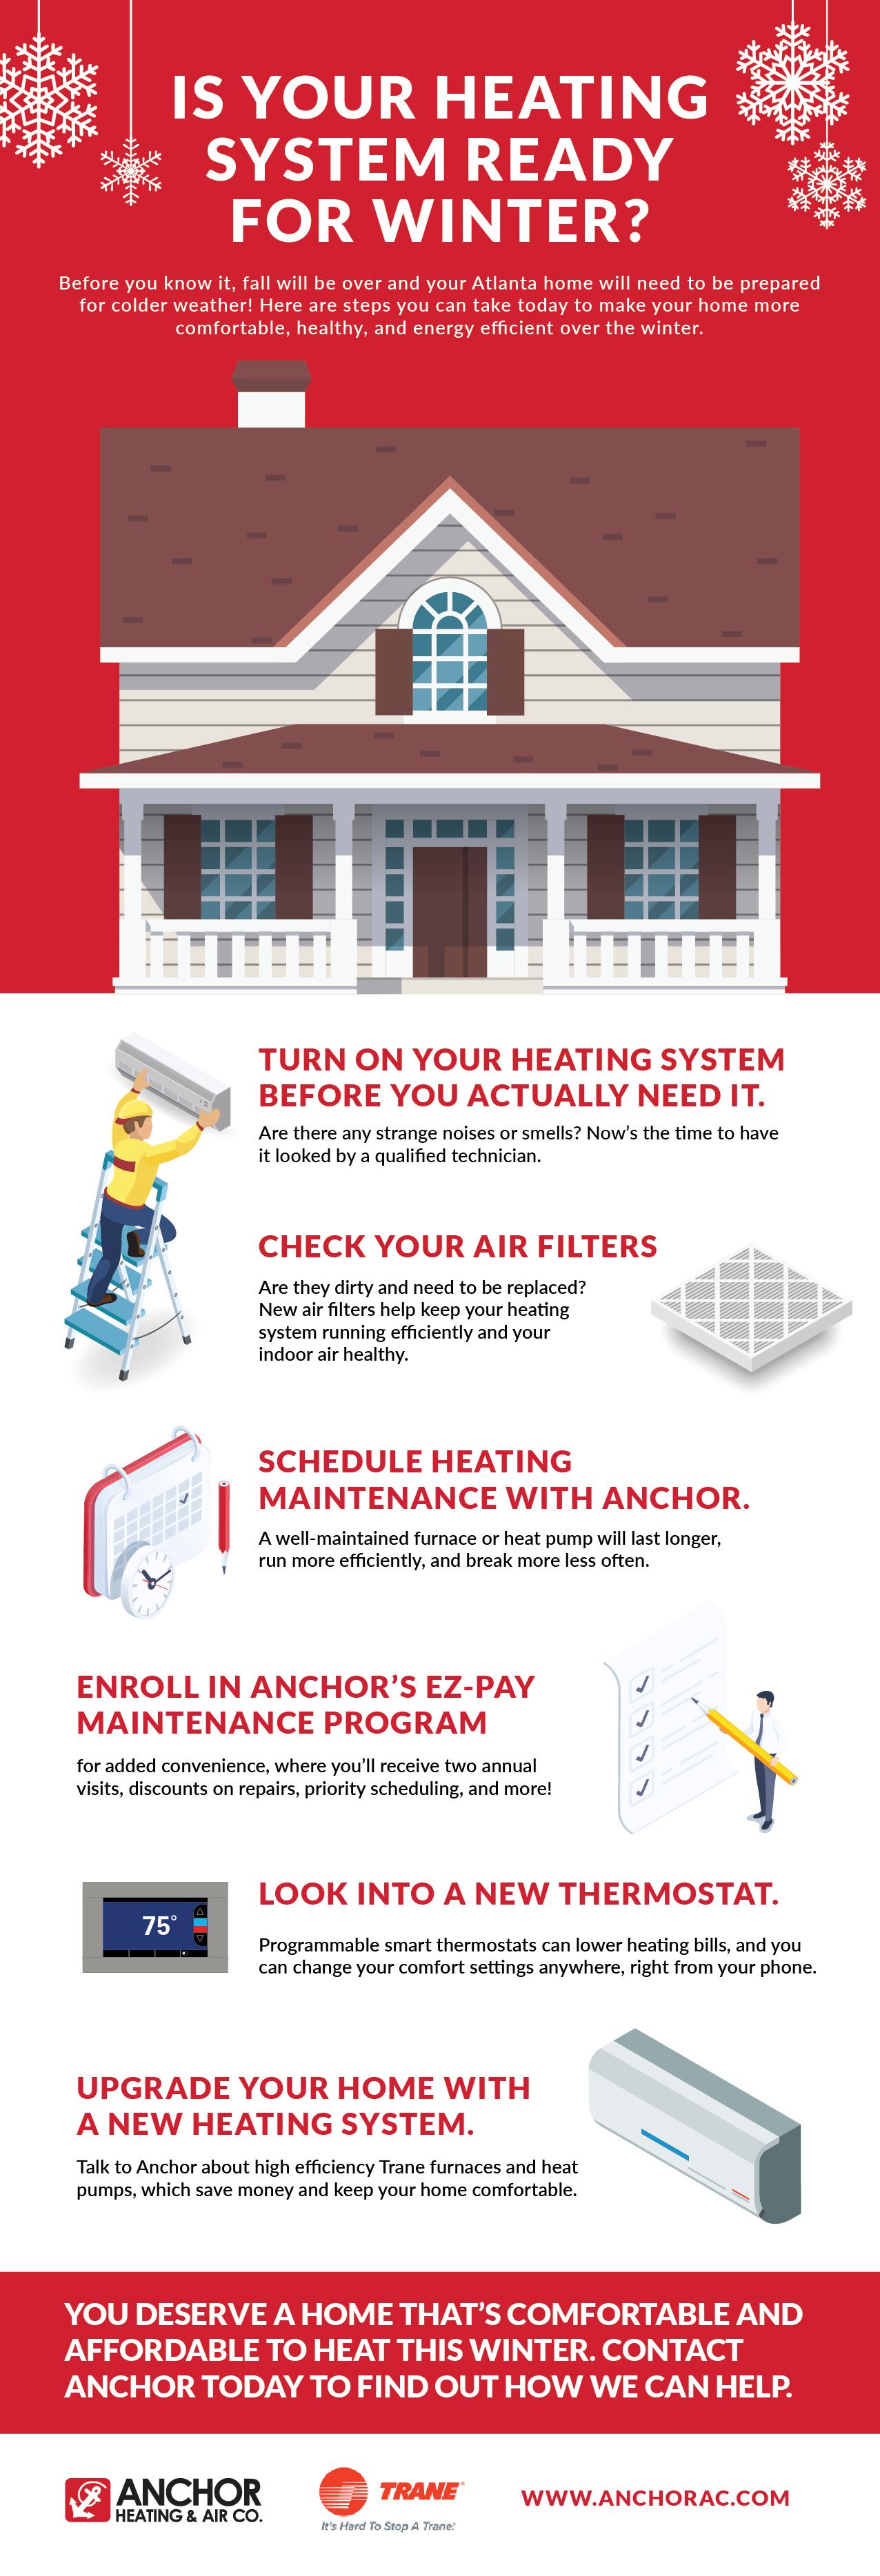 Anchor Prepare Your Home for Cooler Temps infographic